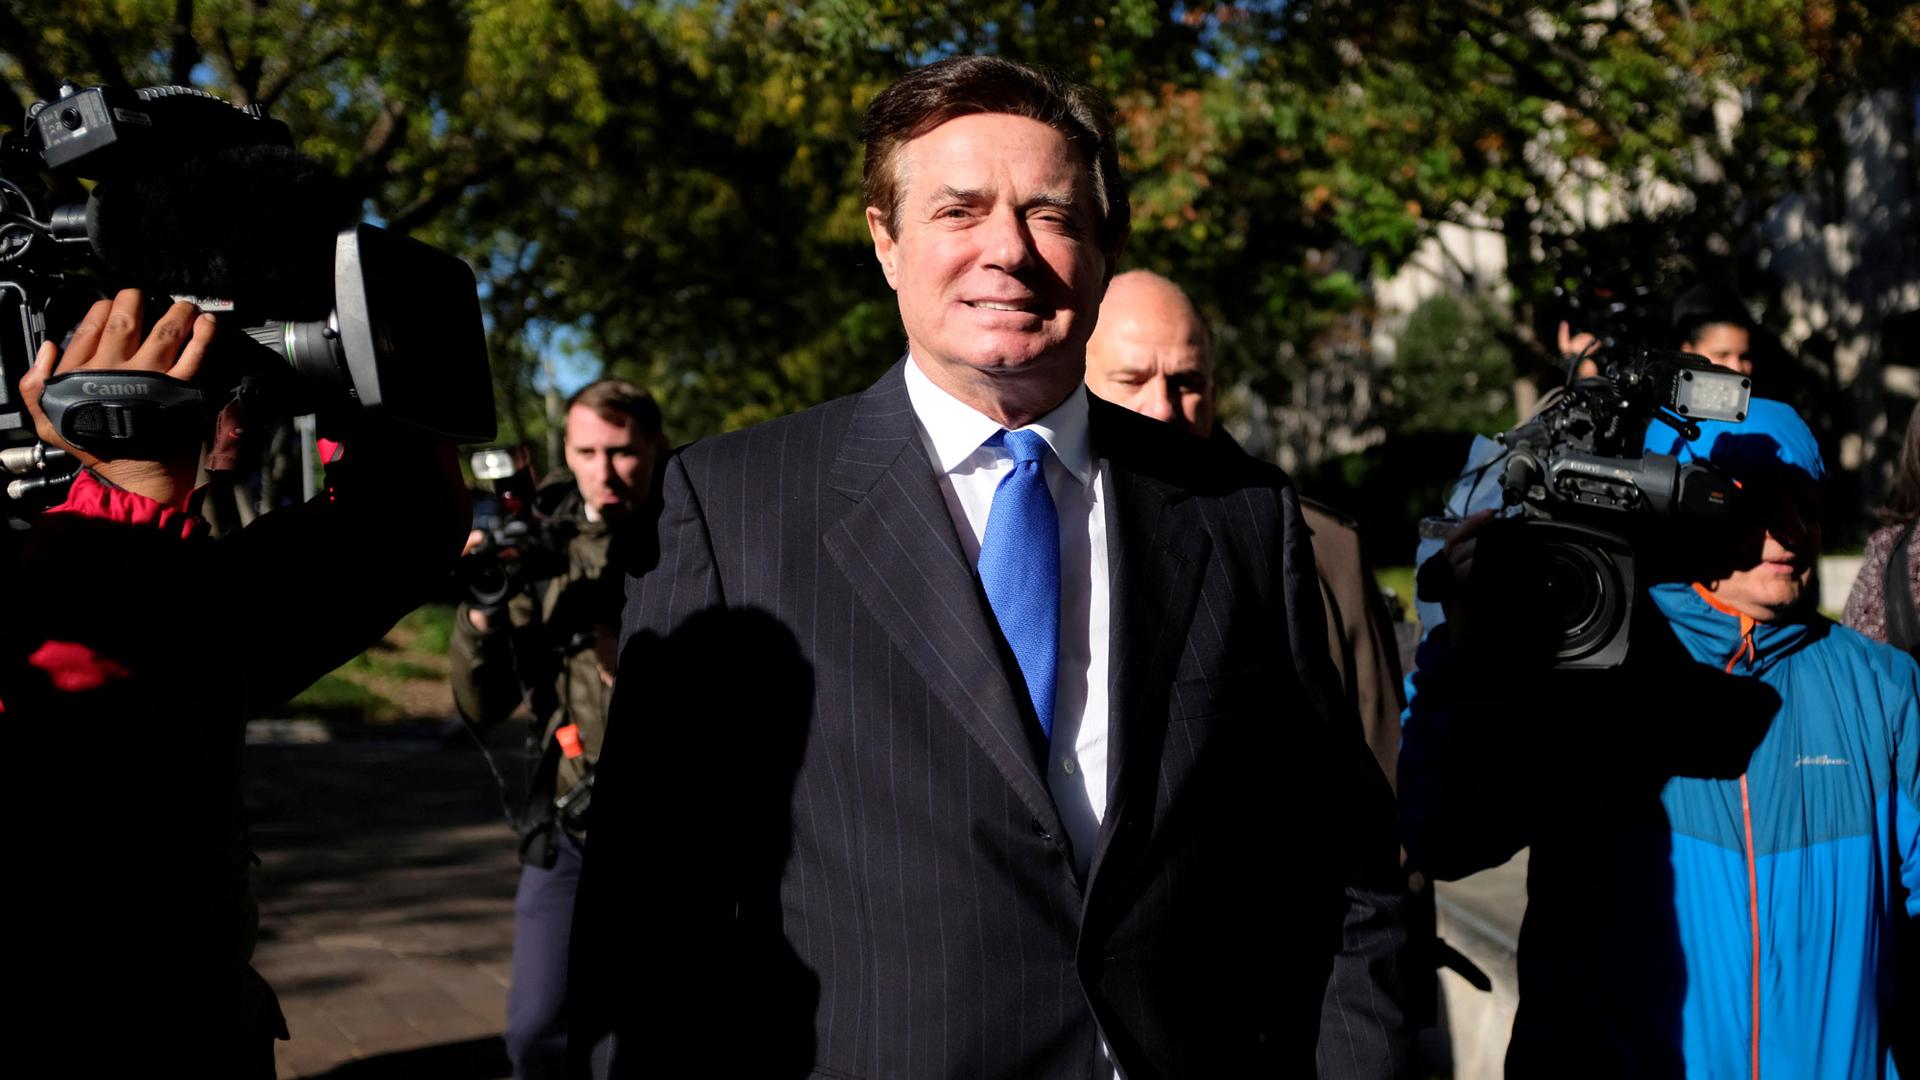 Former Trump 2016 campaign chairman Paul Manafort is shown wearing a suit and blue tie surrounded by cameras in Washington, 2017.